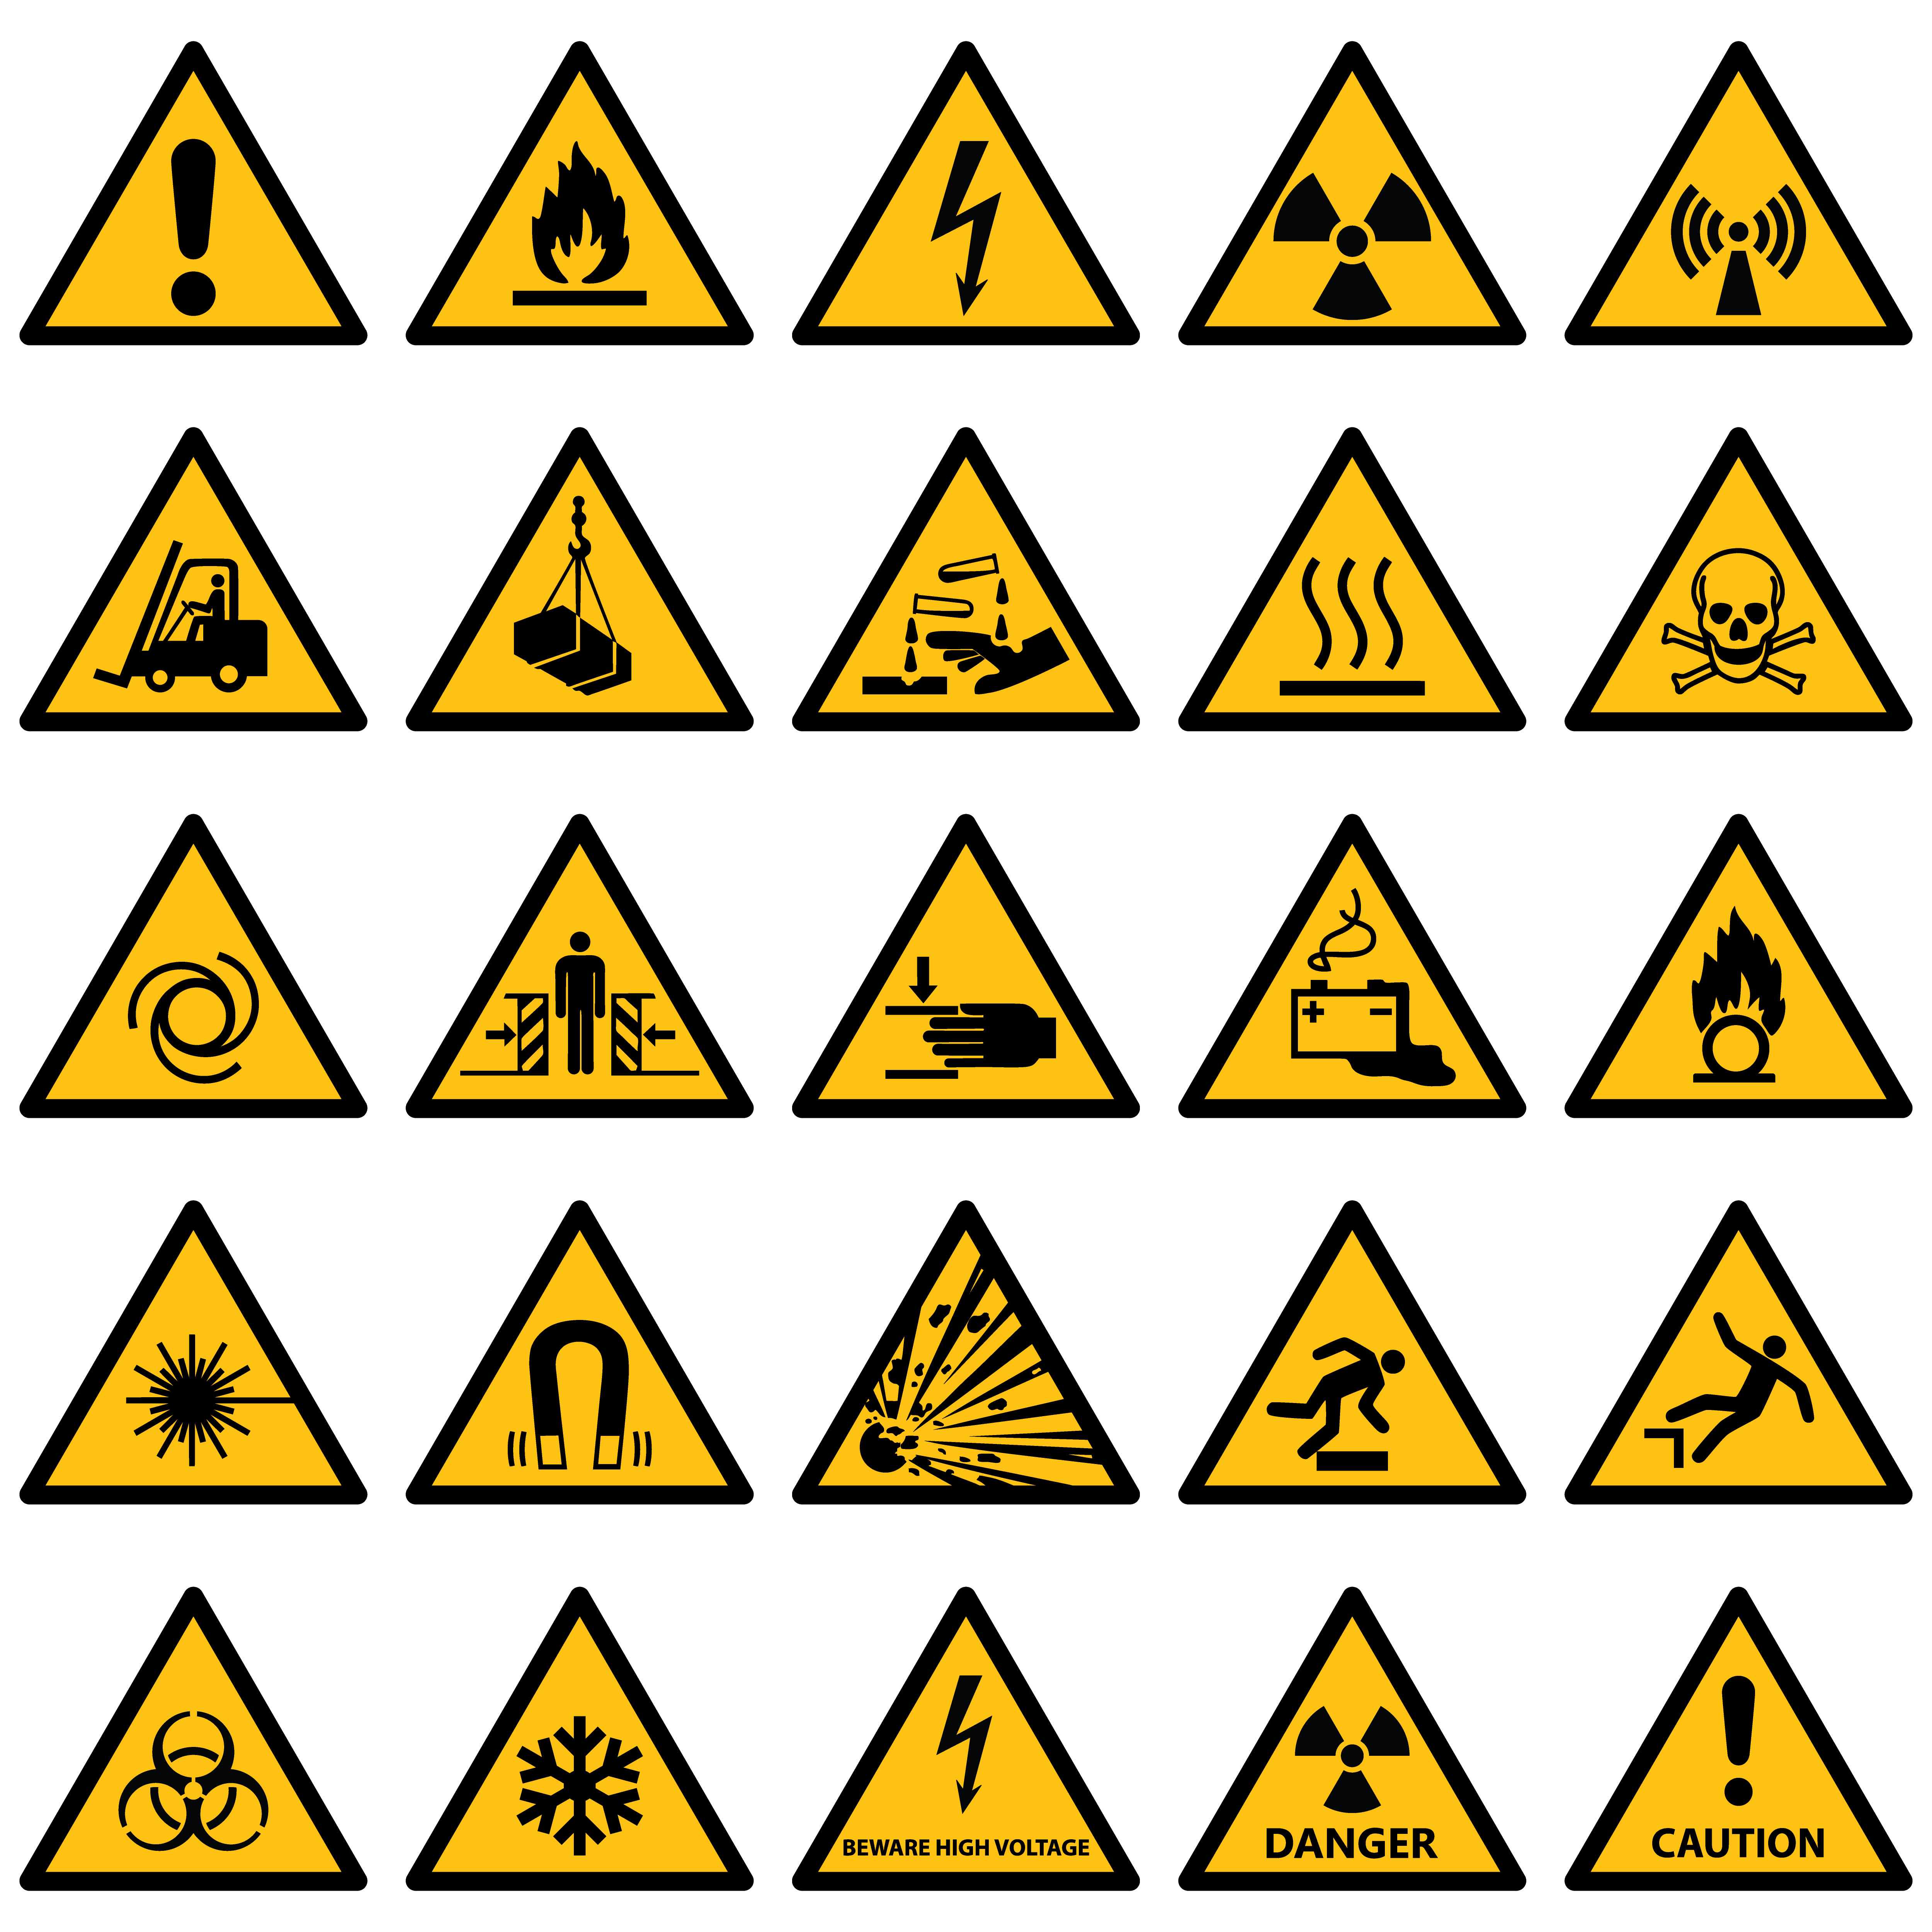 warning-signs-are-a-standard-design-and-the-hse-have-made-a-standard-sign